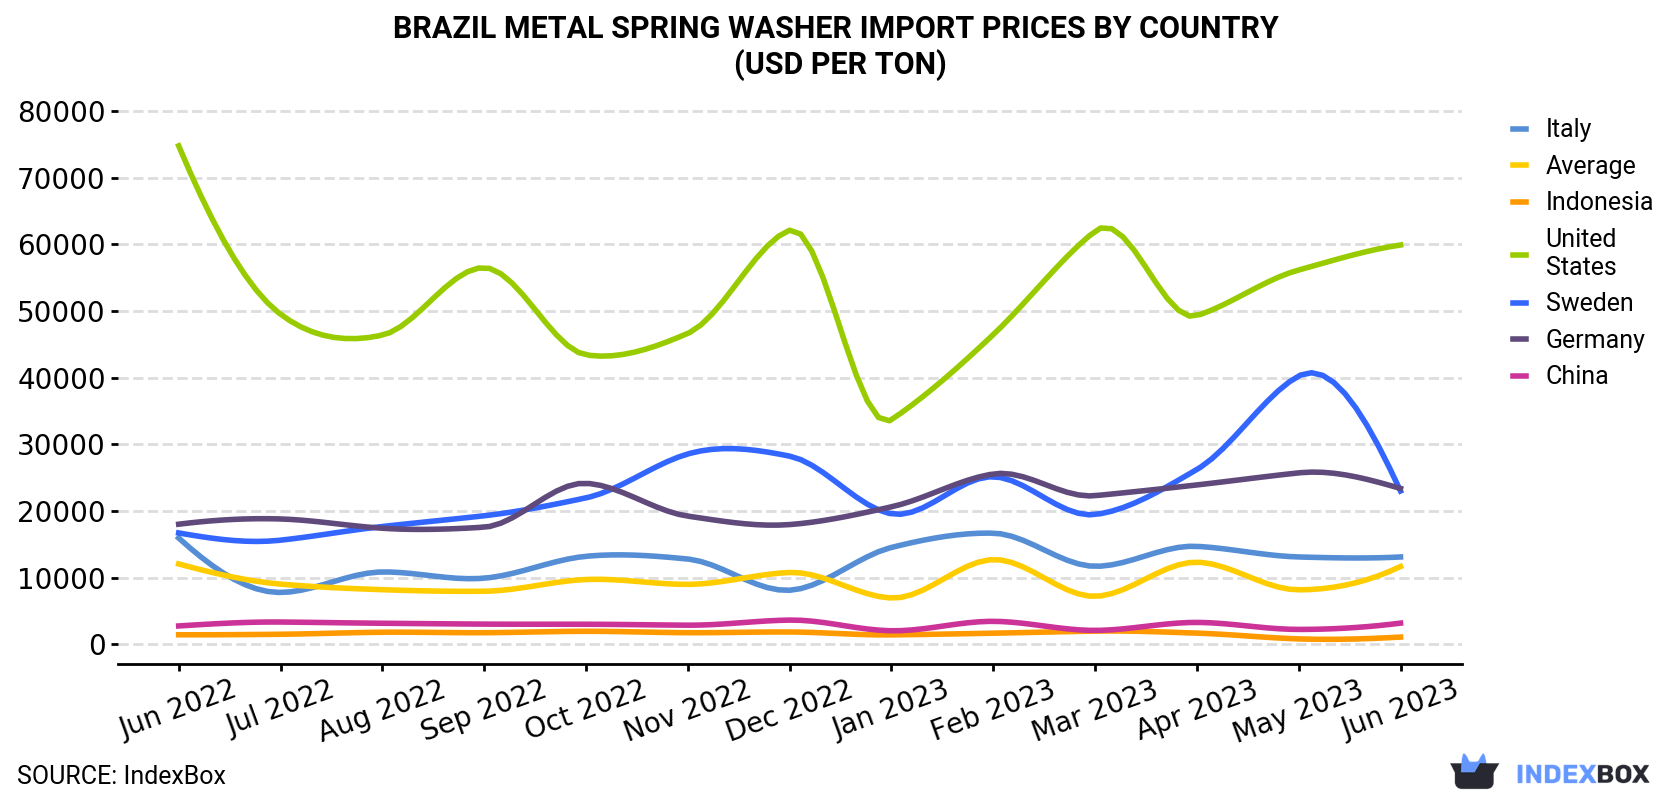 Brazil Metal Spring Washer Import Prices By Country (USD Per Ton)